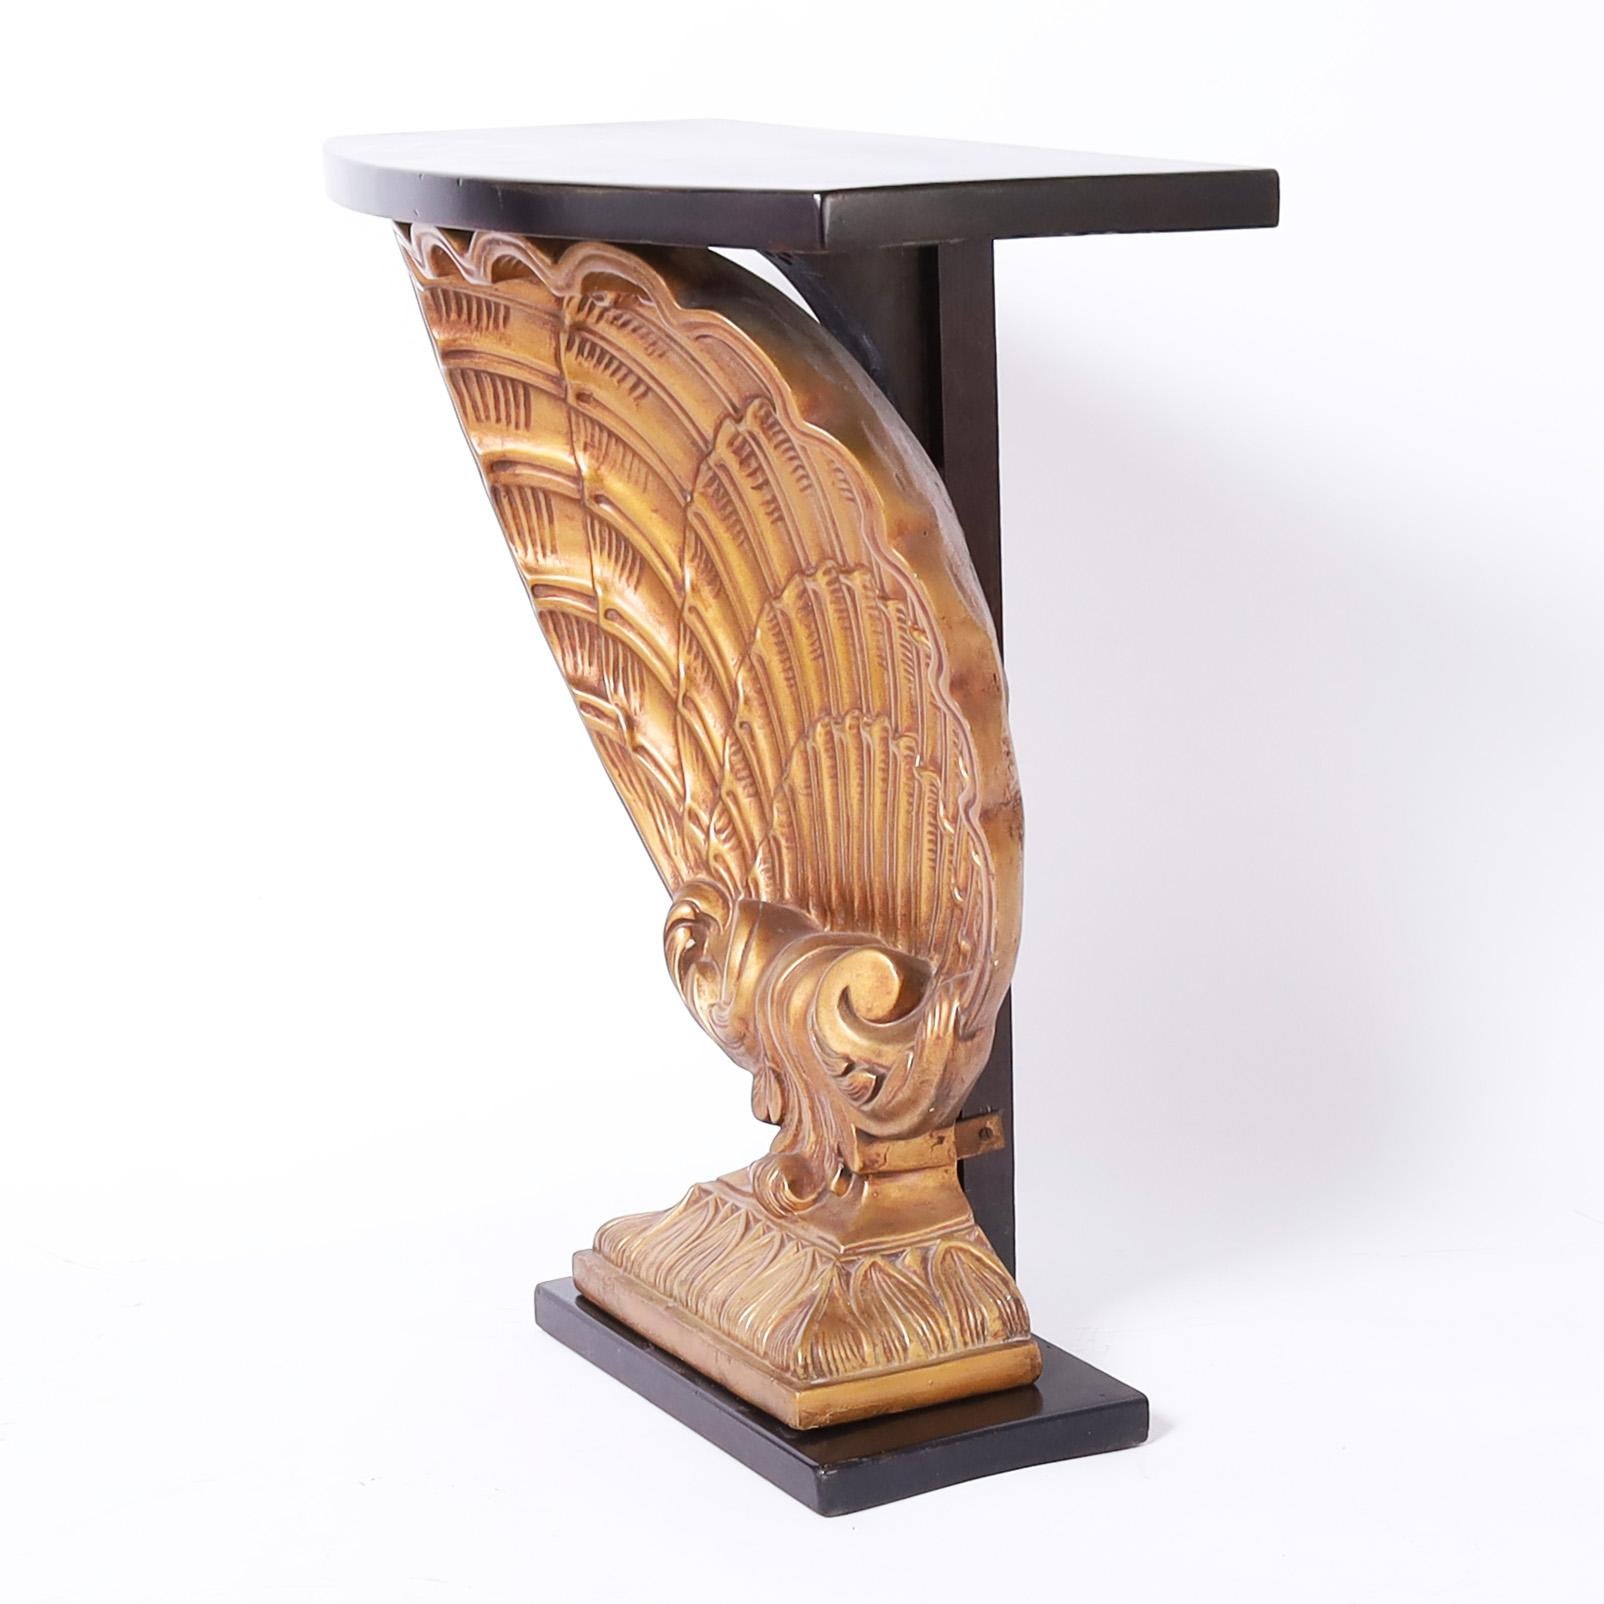 Vintage Hollywood style console table with a bow front top having a dark lush mahogany finish over a stylized plaster seashell with a gilt finish and lacquer base.